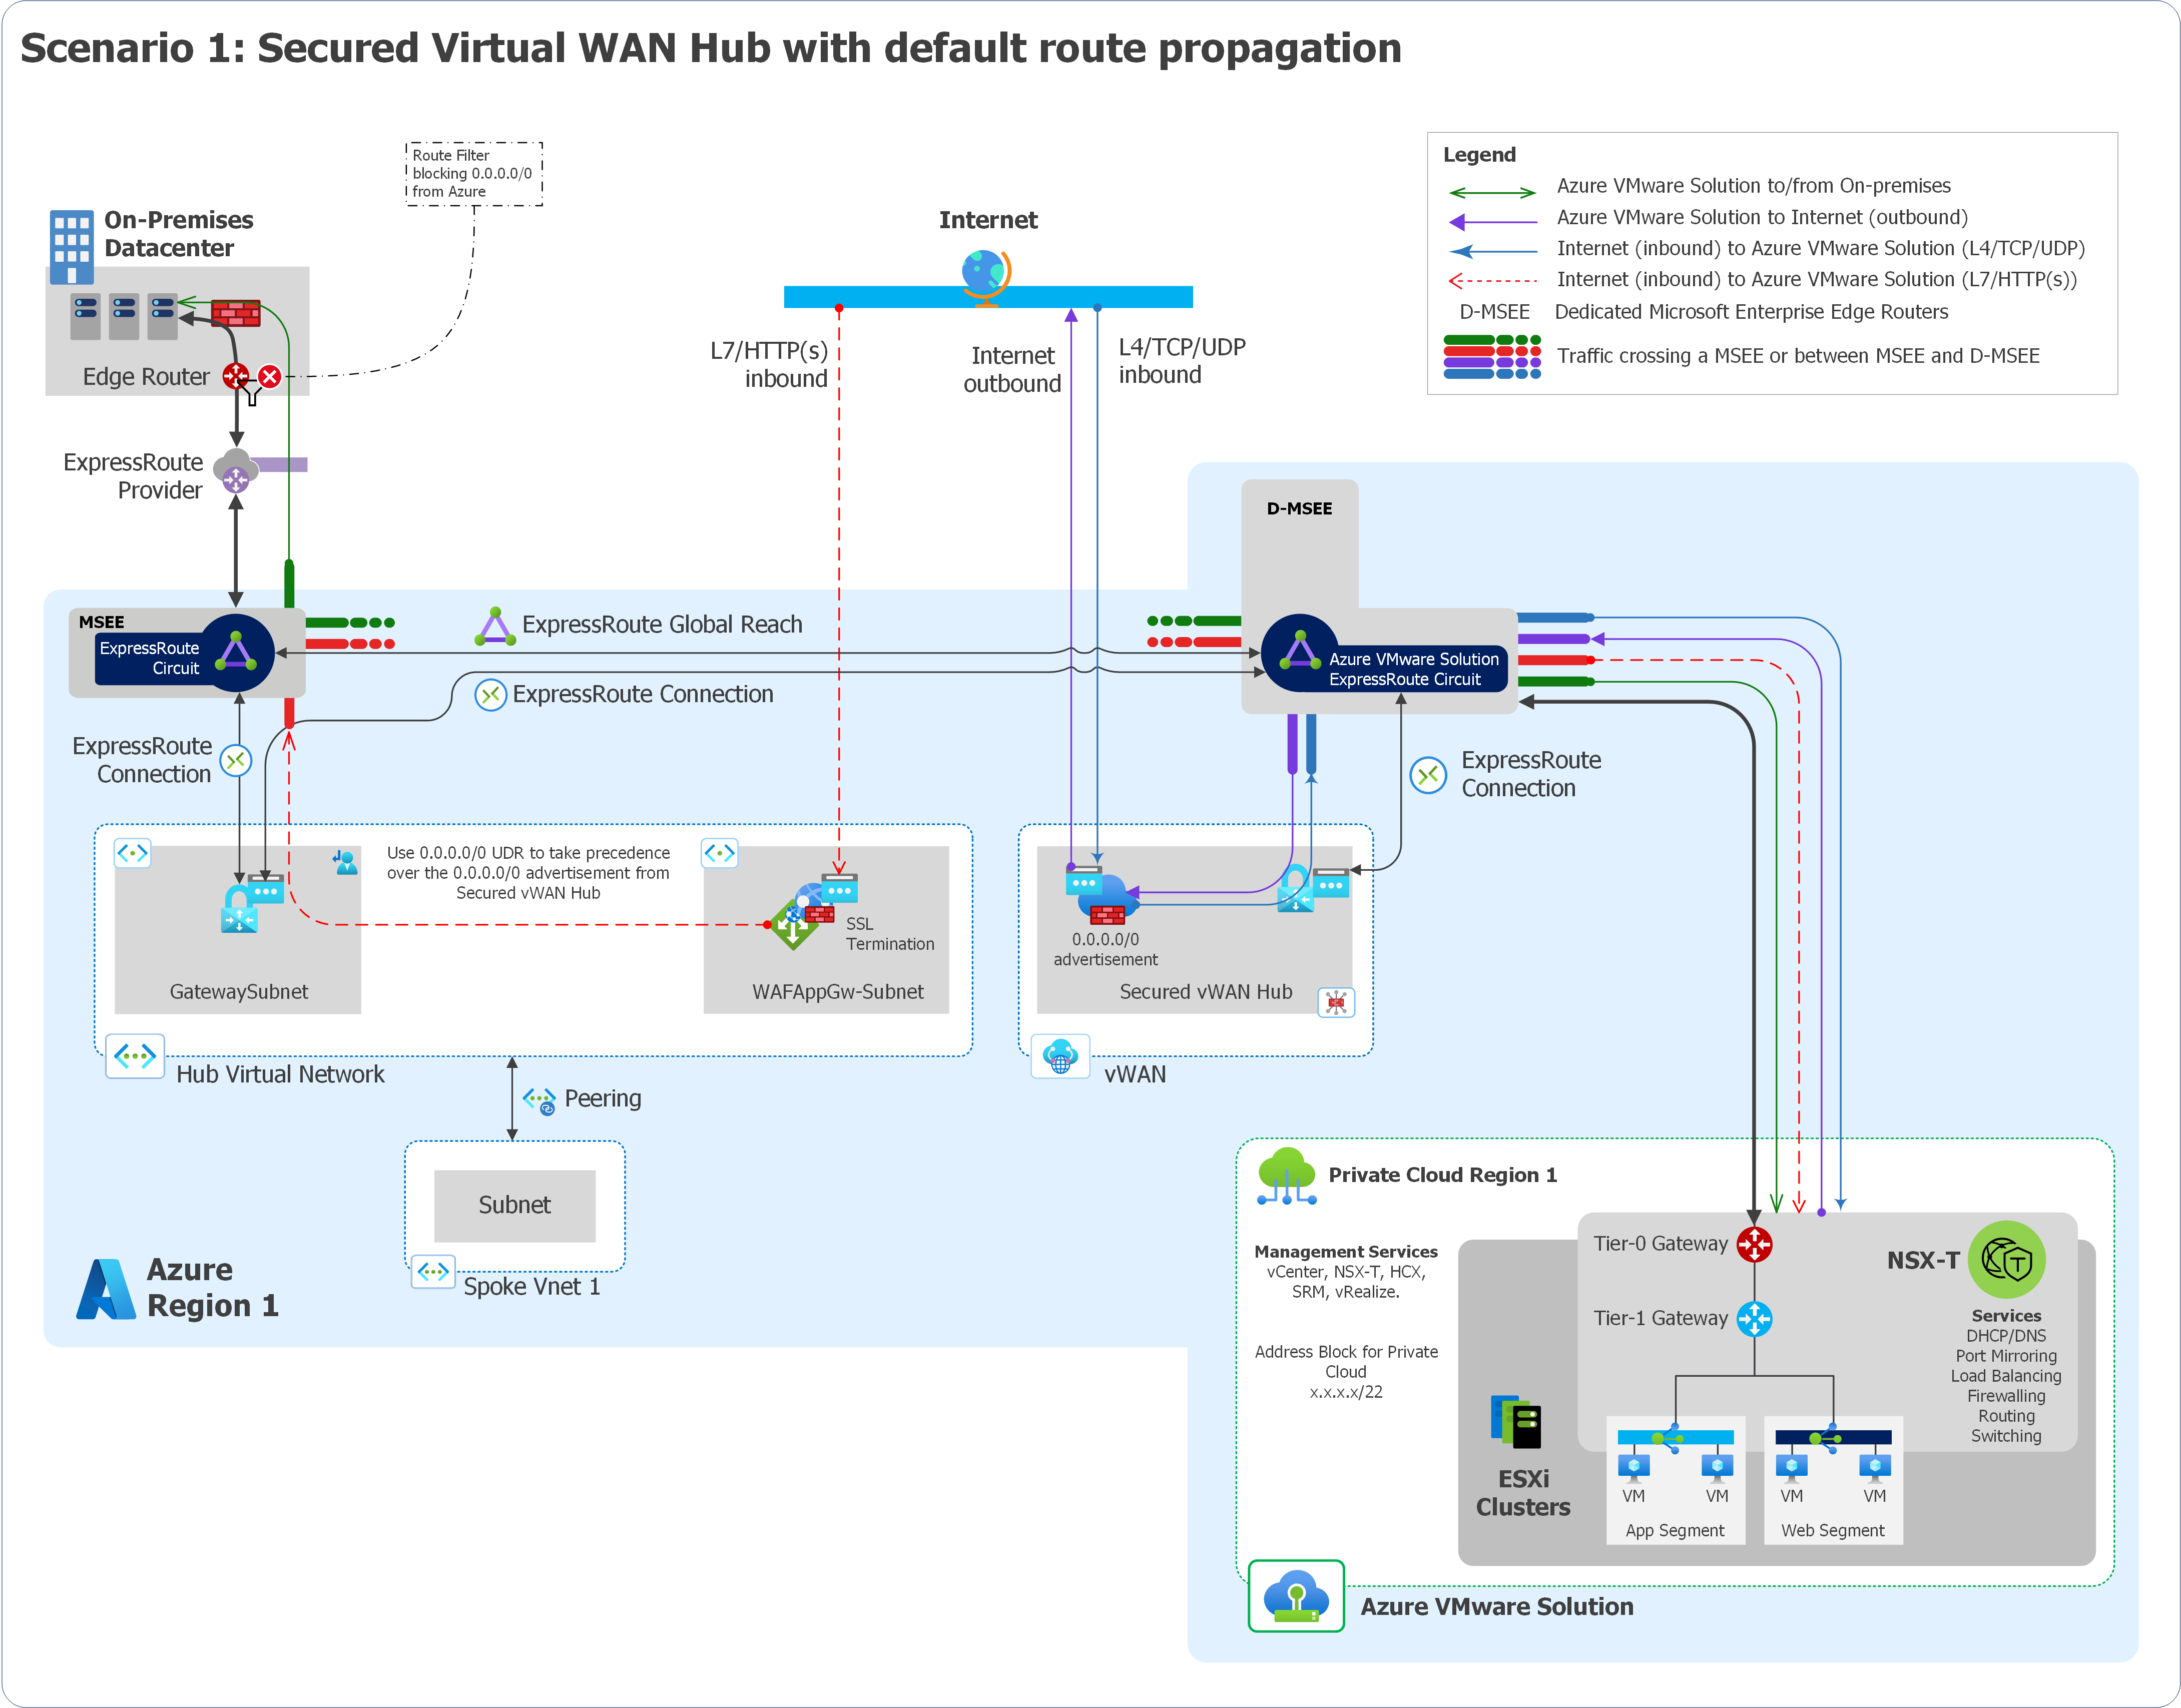 Diagram of scenario 1 with secured Virtual WAN hub with default route propagation.